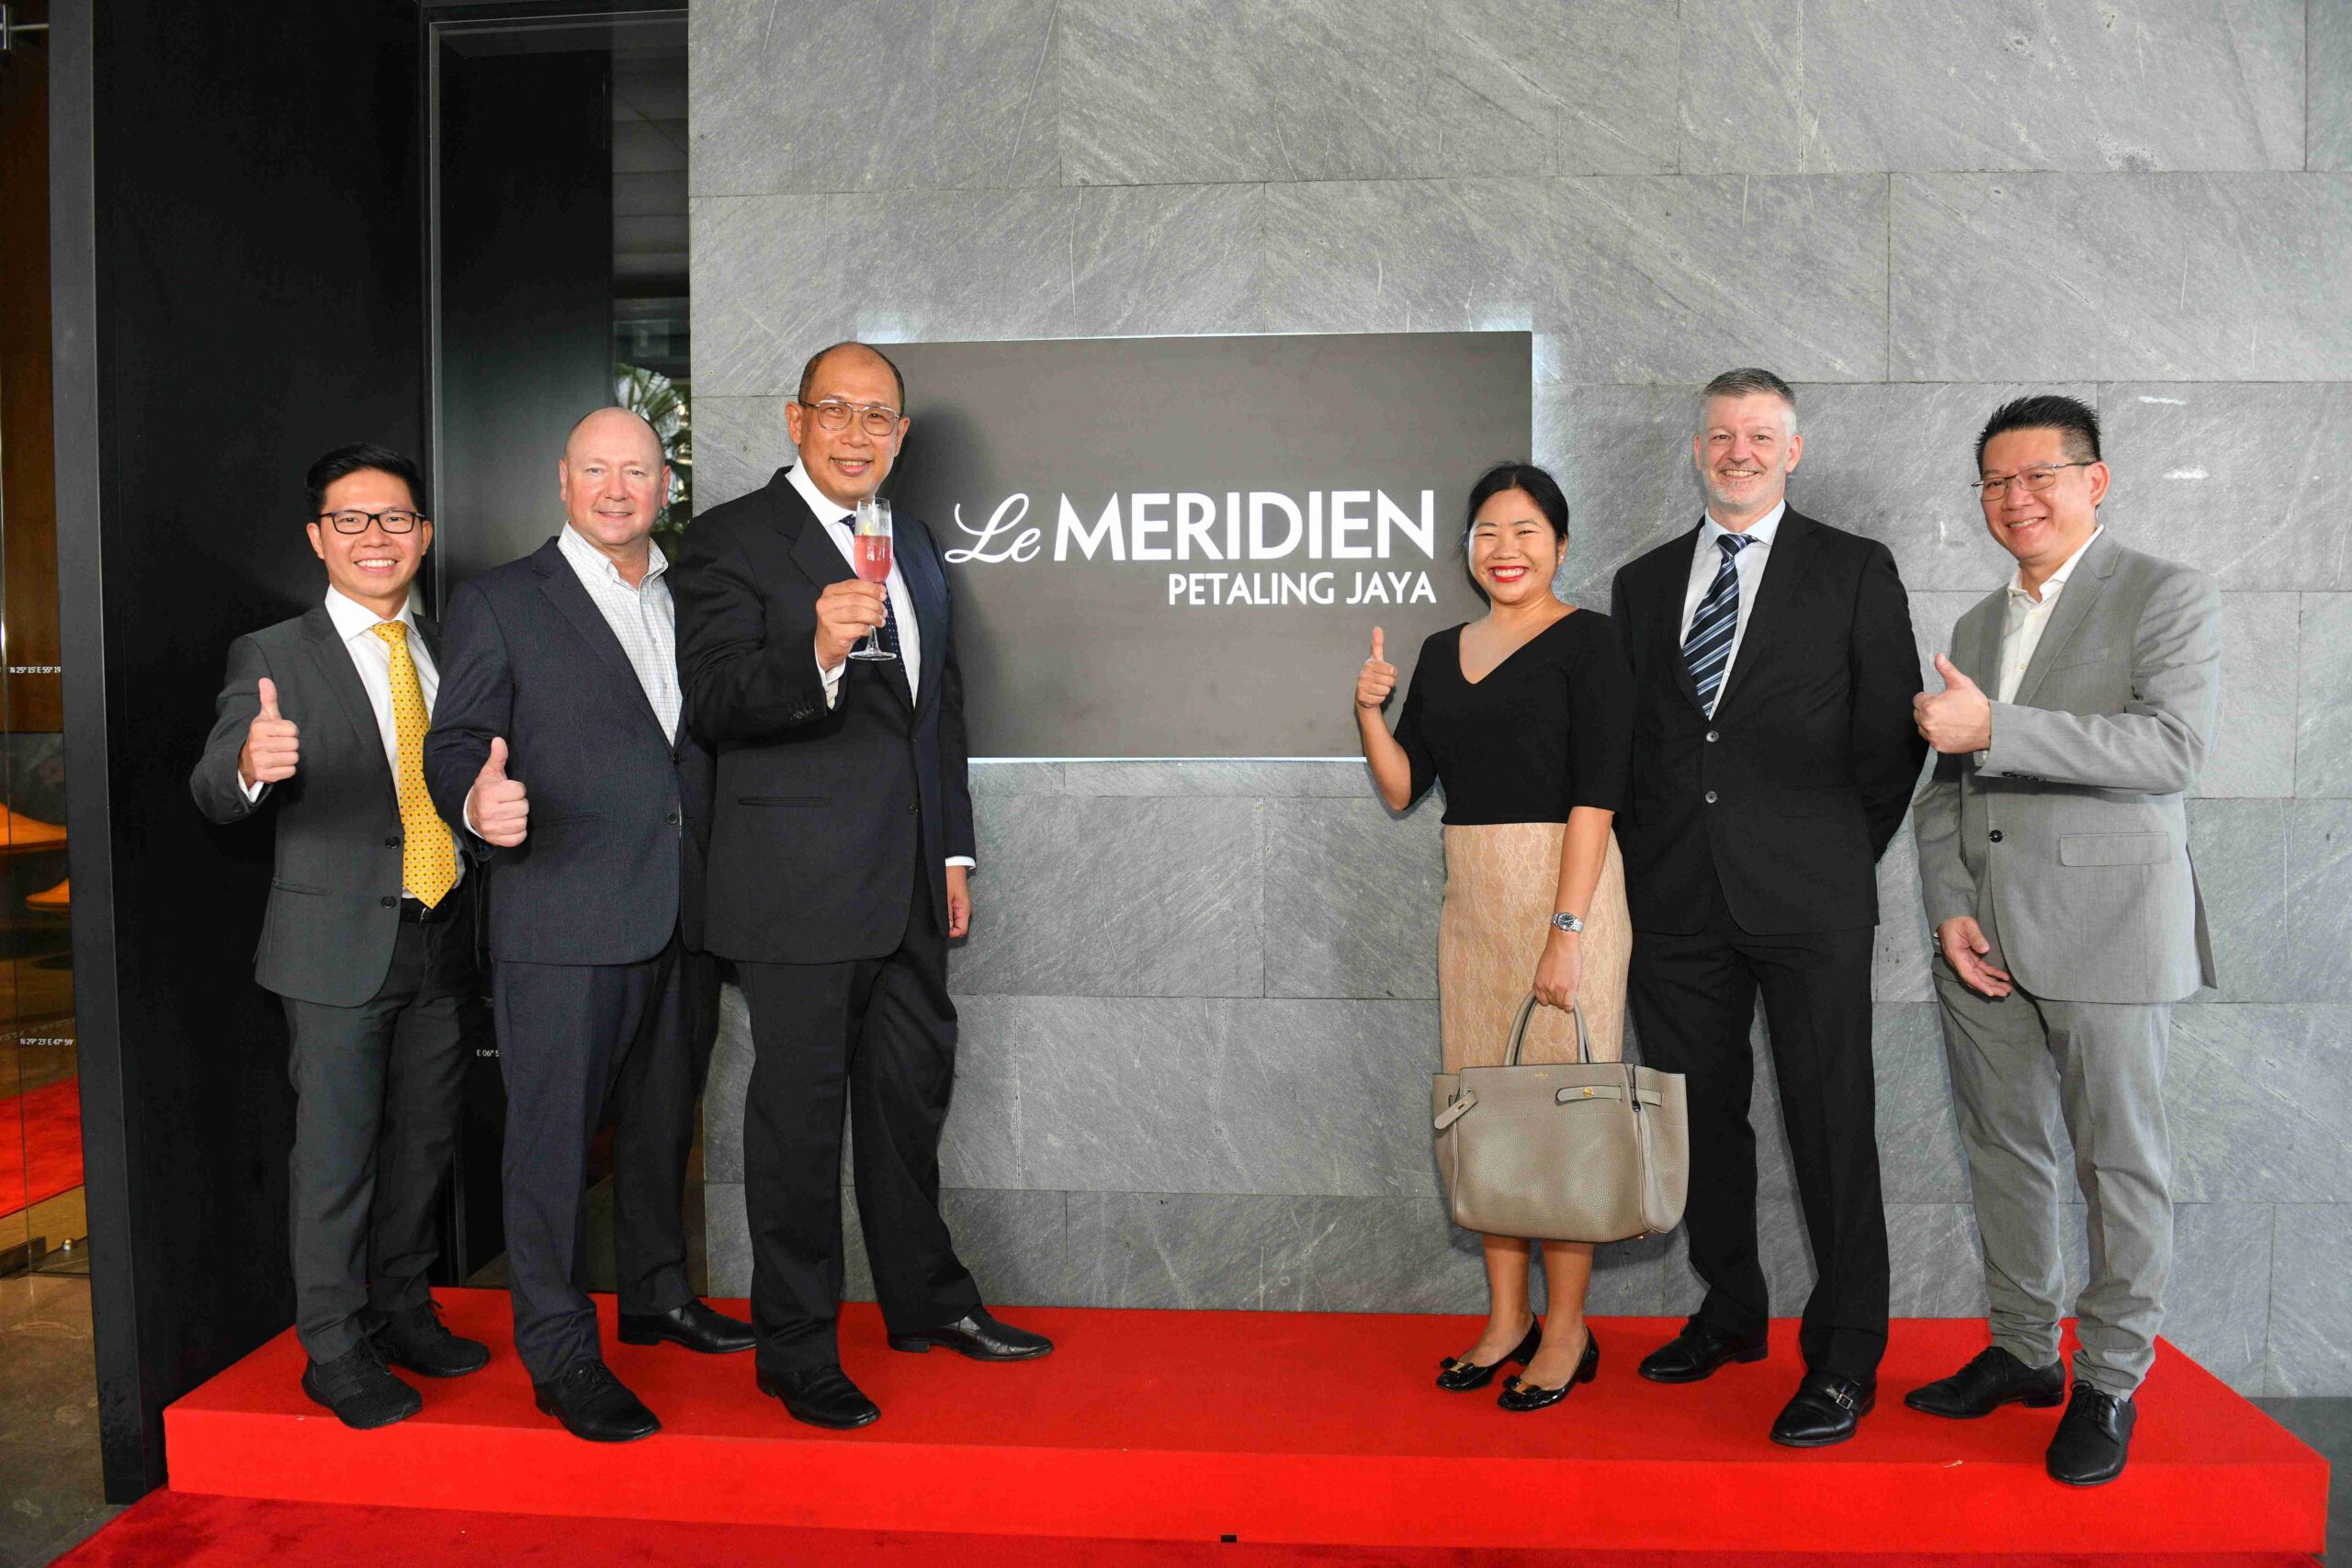 Le Meridien Expands Its Footprint in Malaysia with the Opening of Le Meridien Petaling Jaya